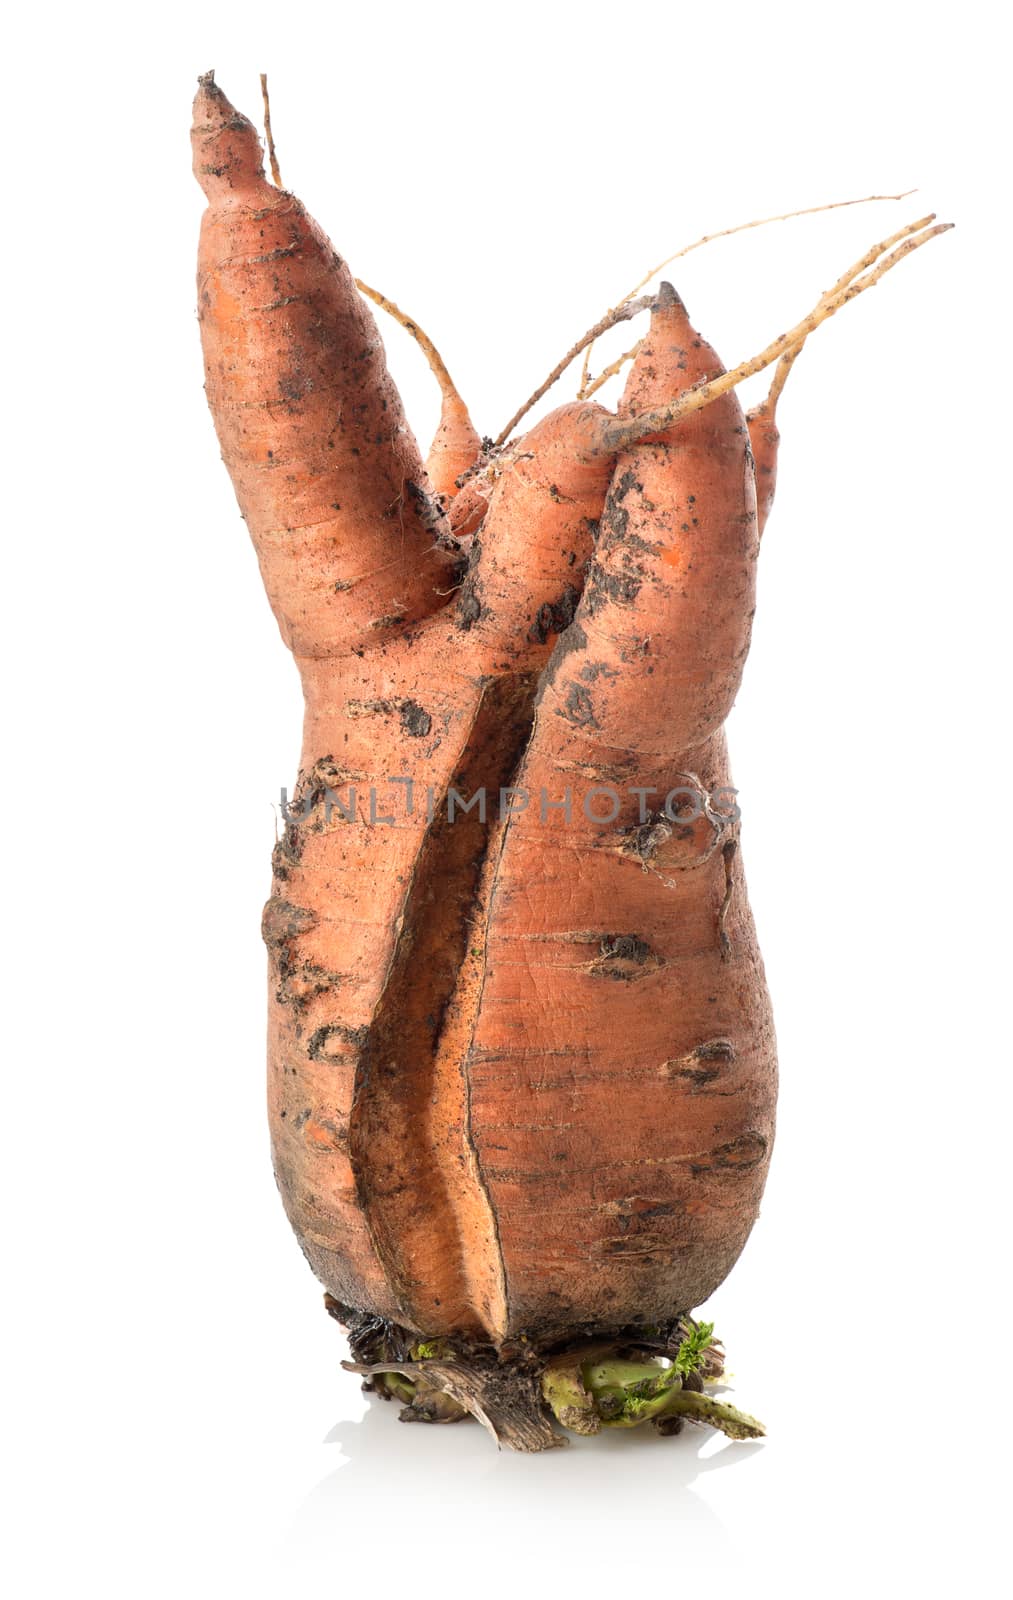 Carrot mutant by Givaga